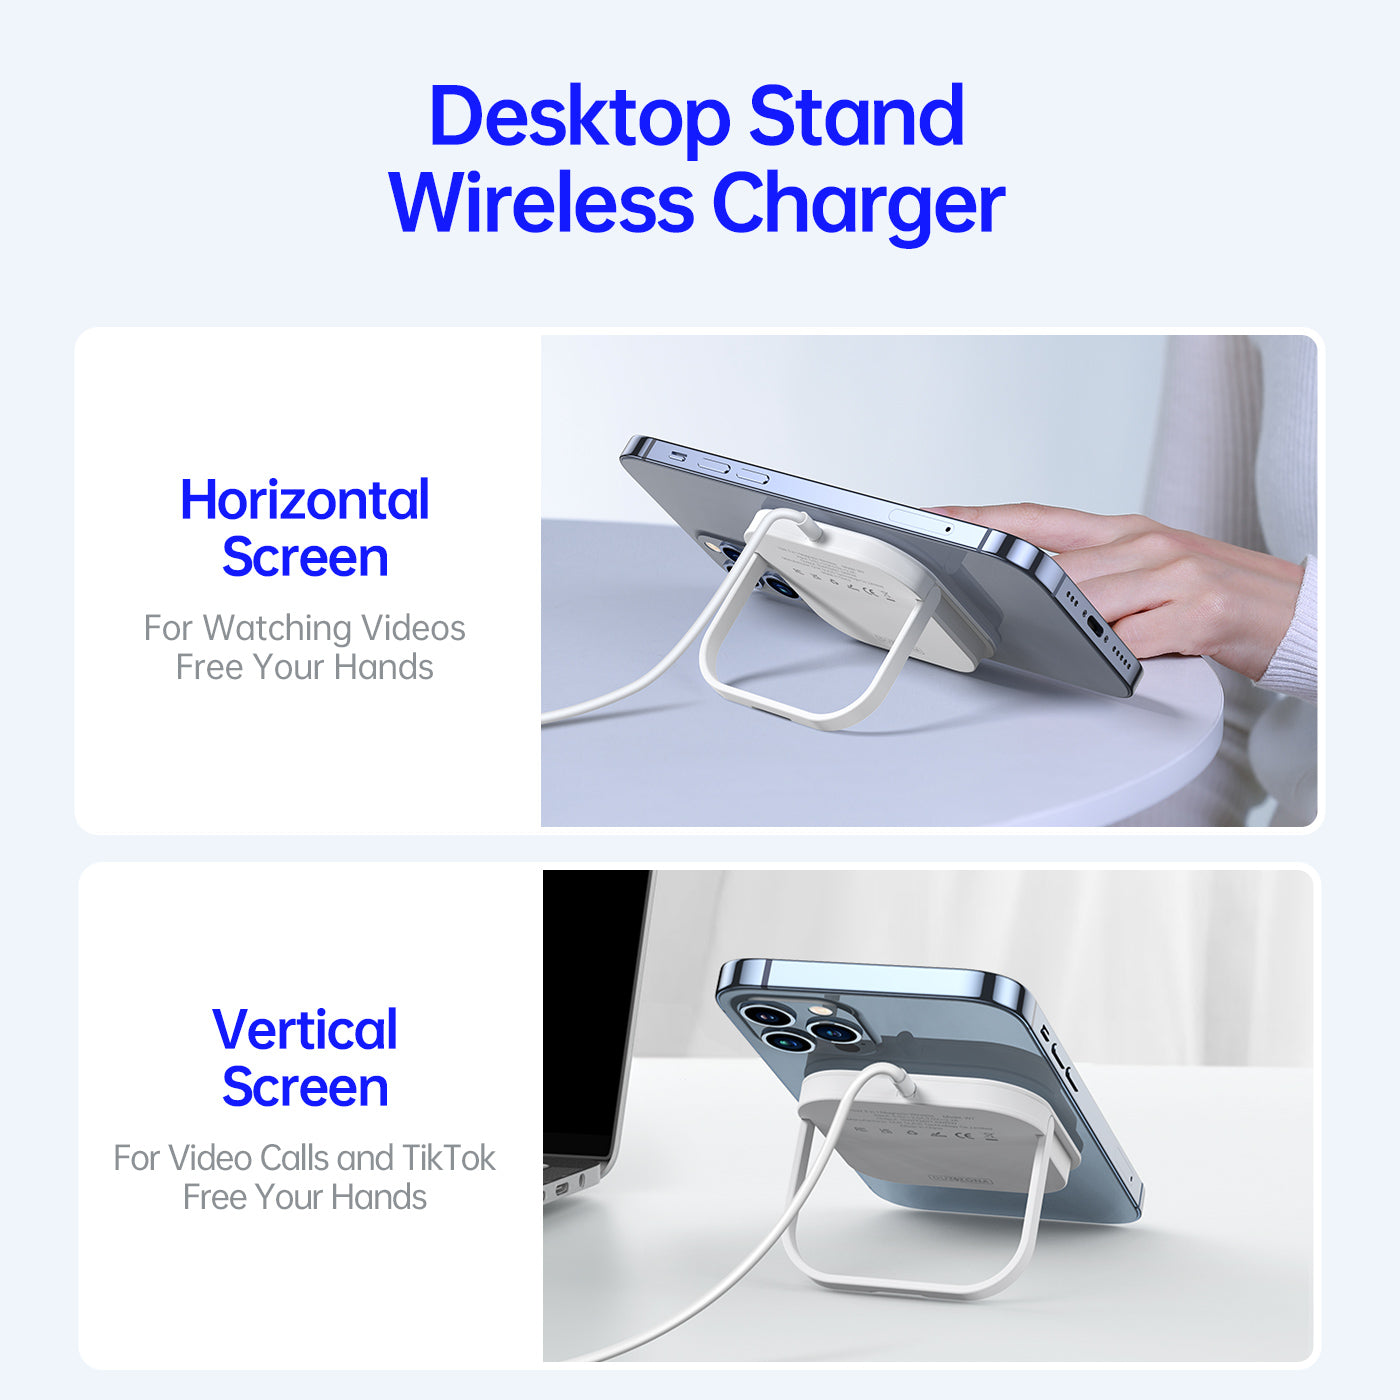 MagSafe Kickstand Wireless Charger with Fast Charging Capability (Up to 15W)